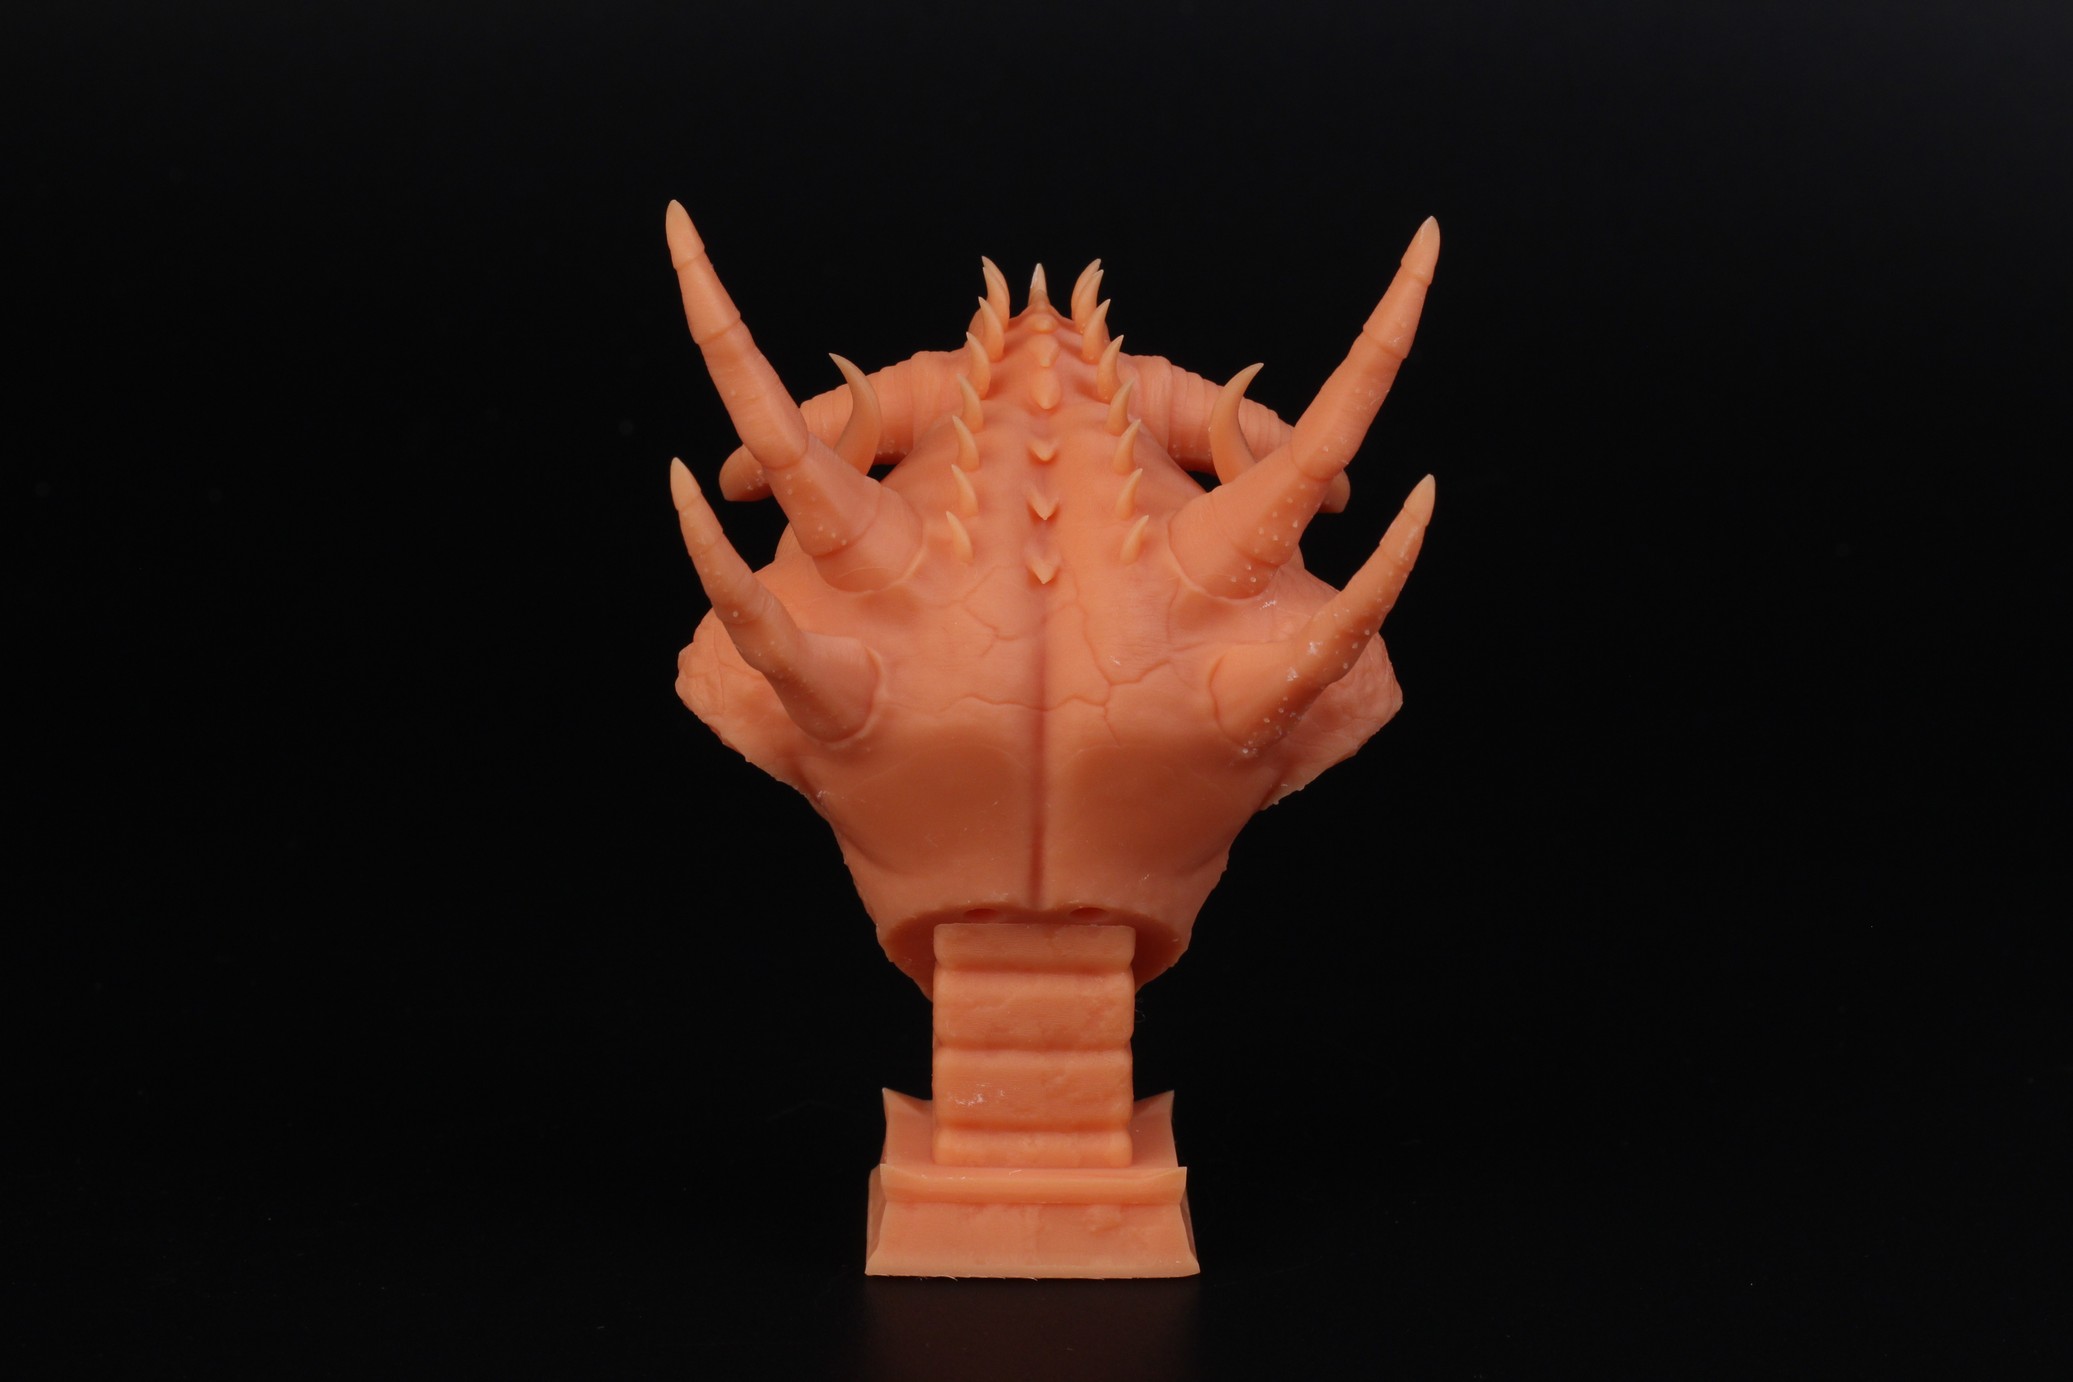 Diablo Bust printed on Anycubic Photon M3 Max 1 | Anycubic Photon M3 Max Review: Who Needs FDM Anymore?